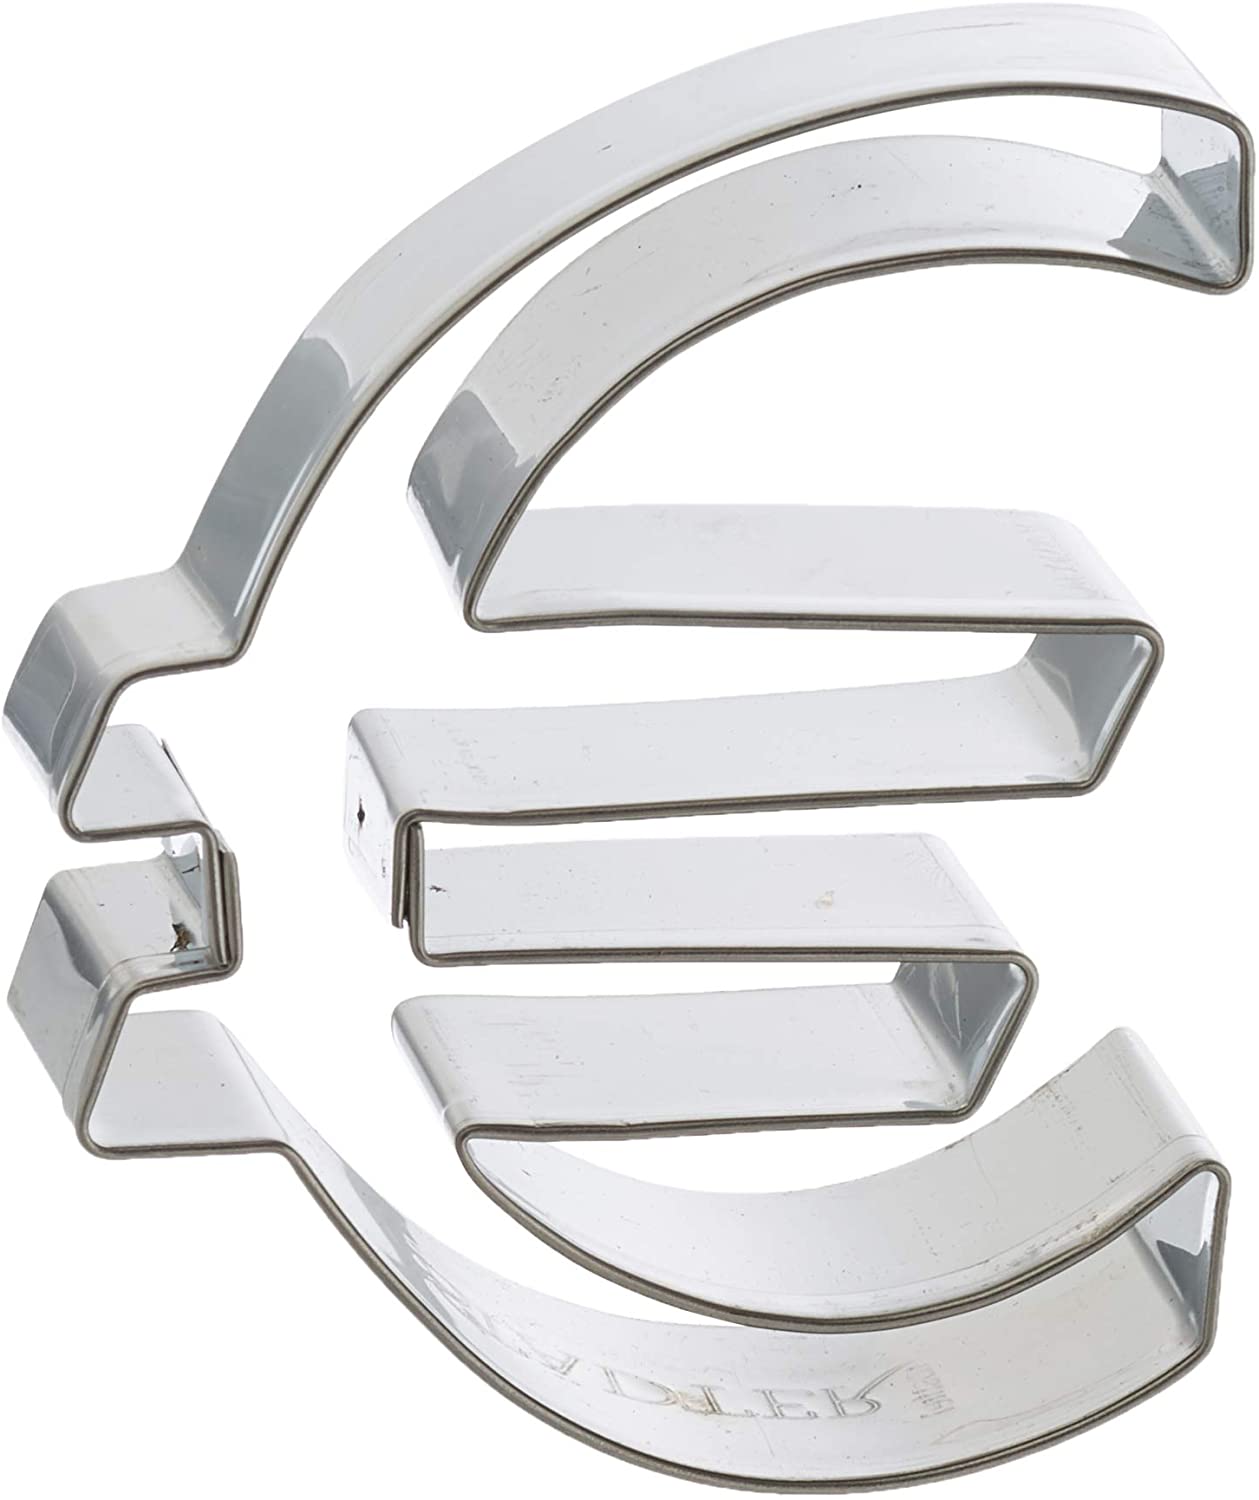 Städter Stainless Steel Euro Sign Cookie Cutter